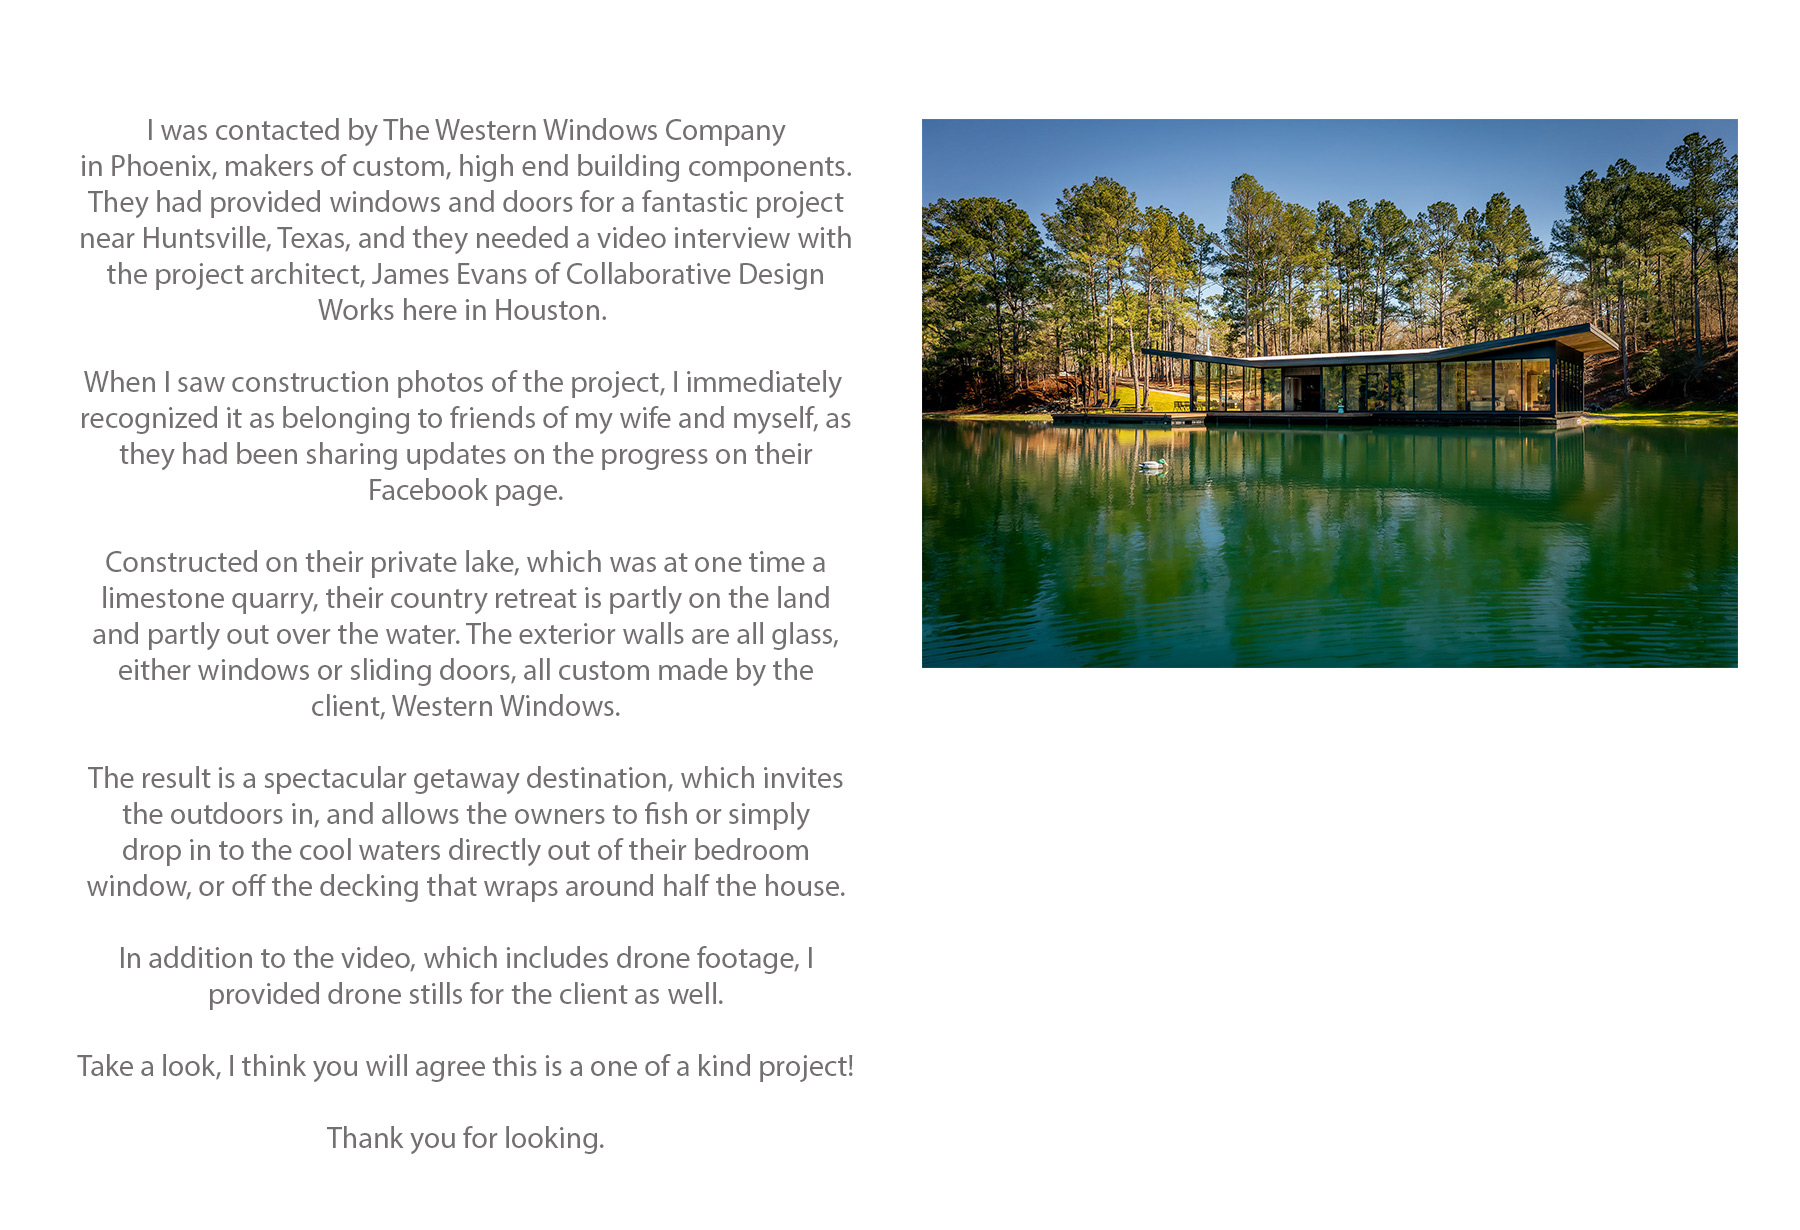 western Windows "Floating Pavilion" Video Project First Page